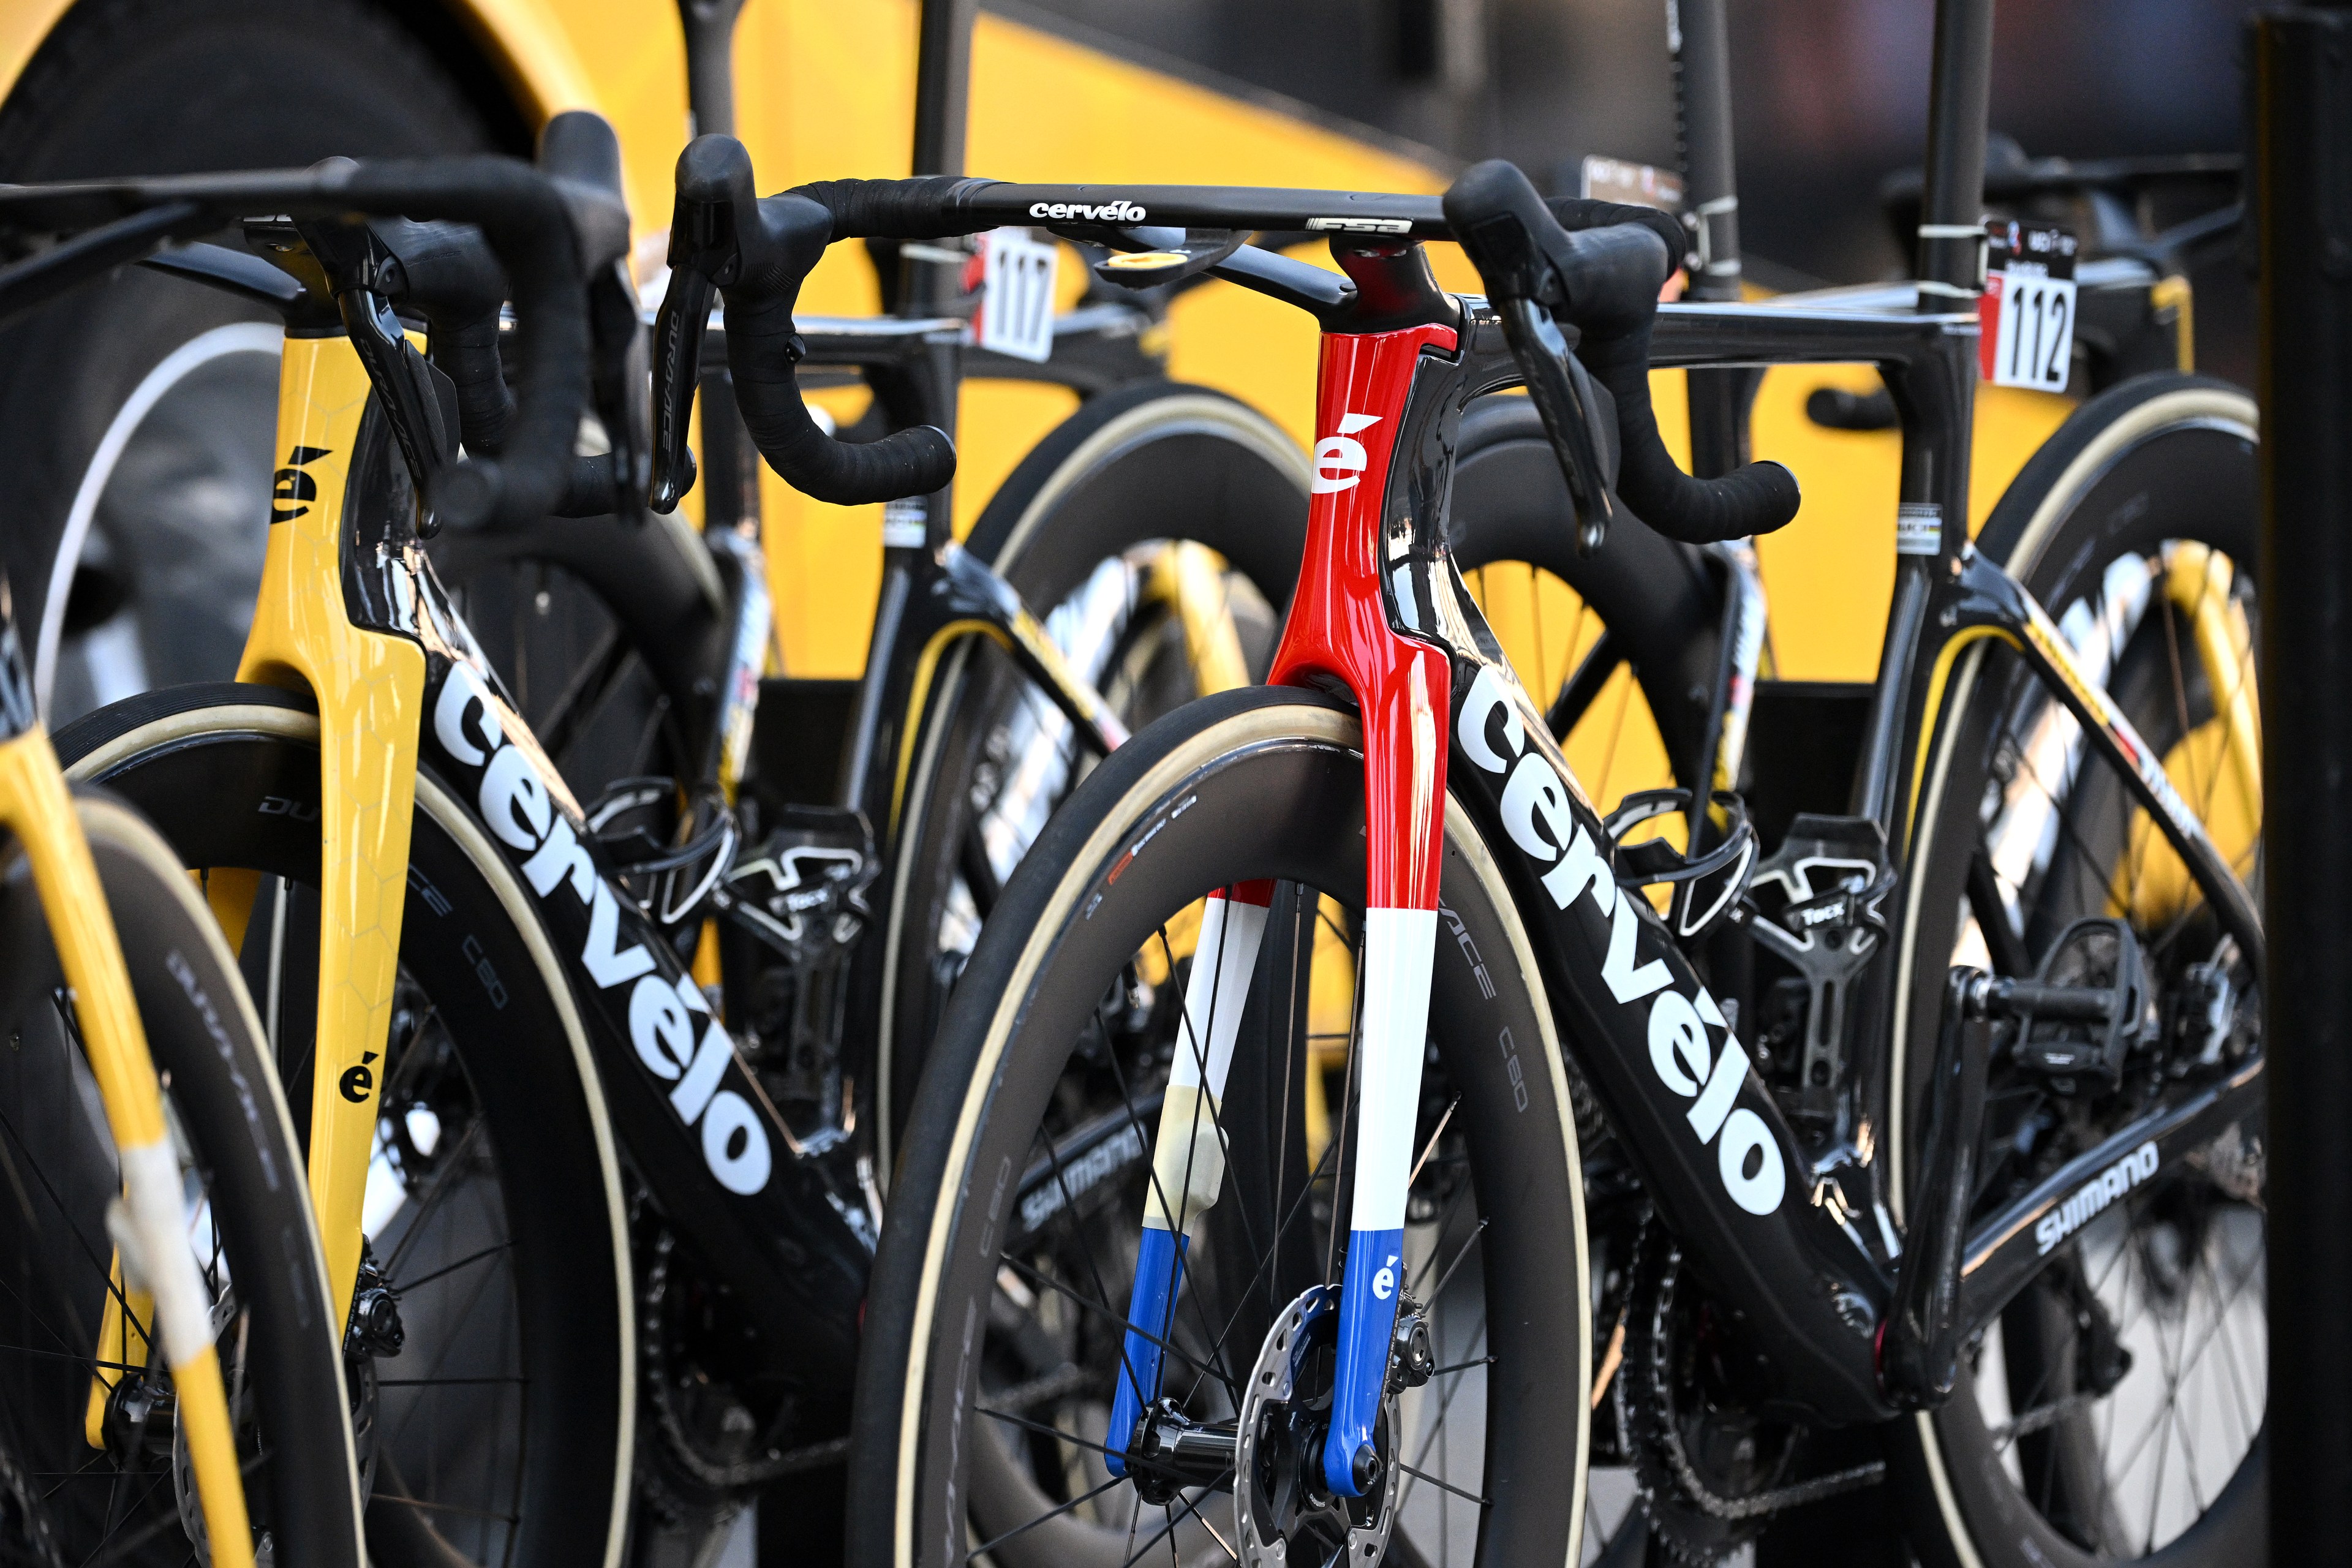 A lineup of yellow and one red-and-white Cervélo road bikes with Shimano parts, mounted on a vehicle rack.